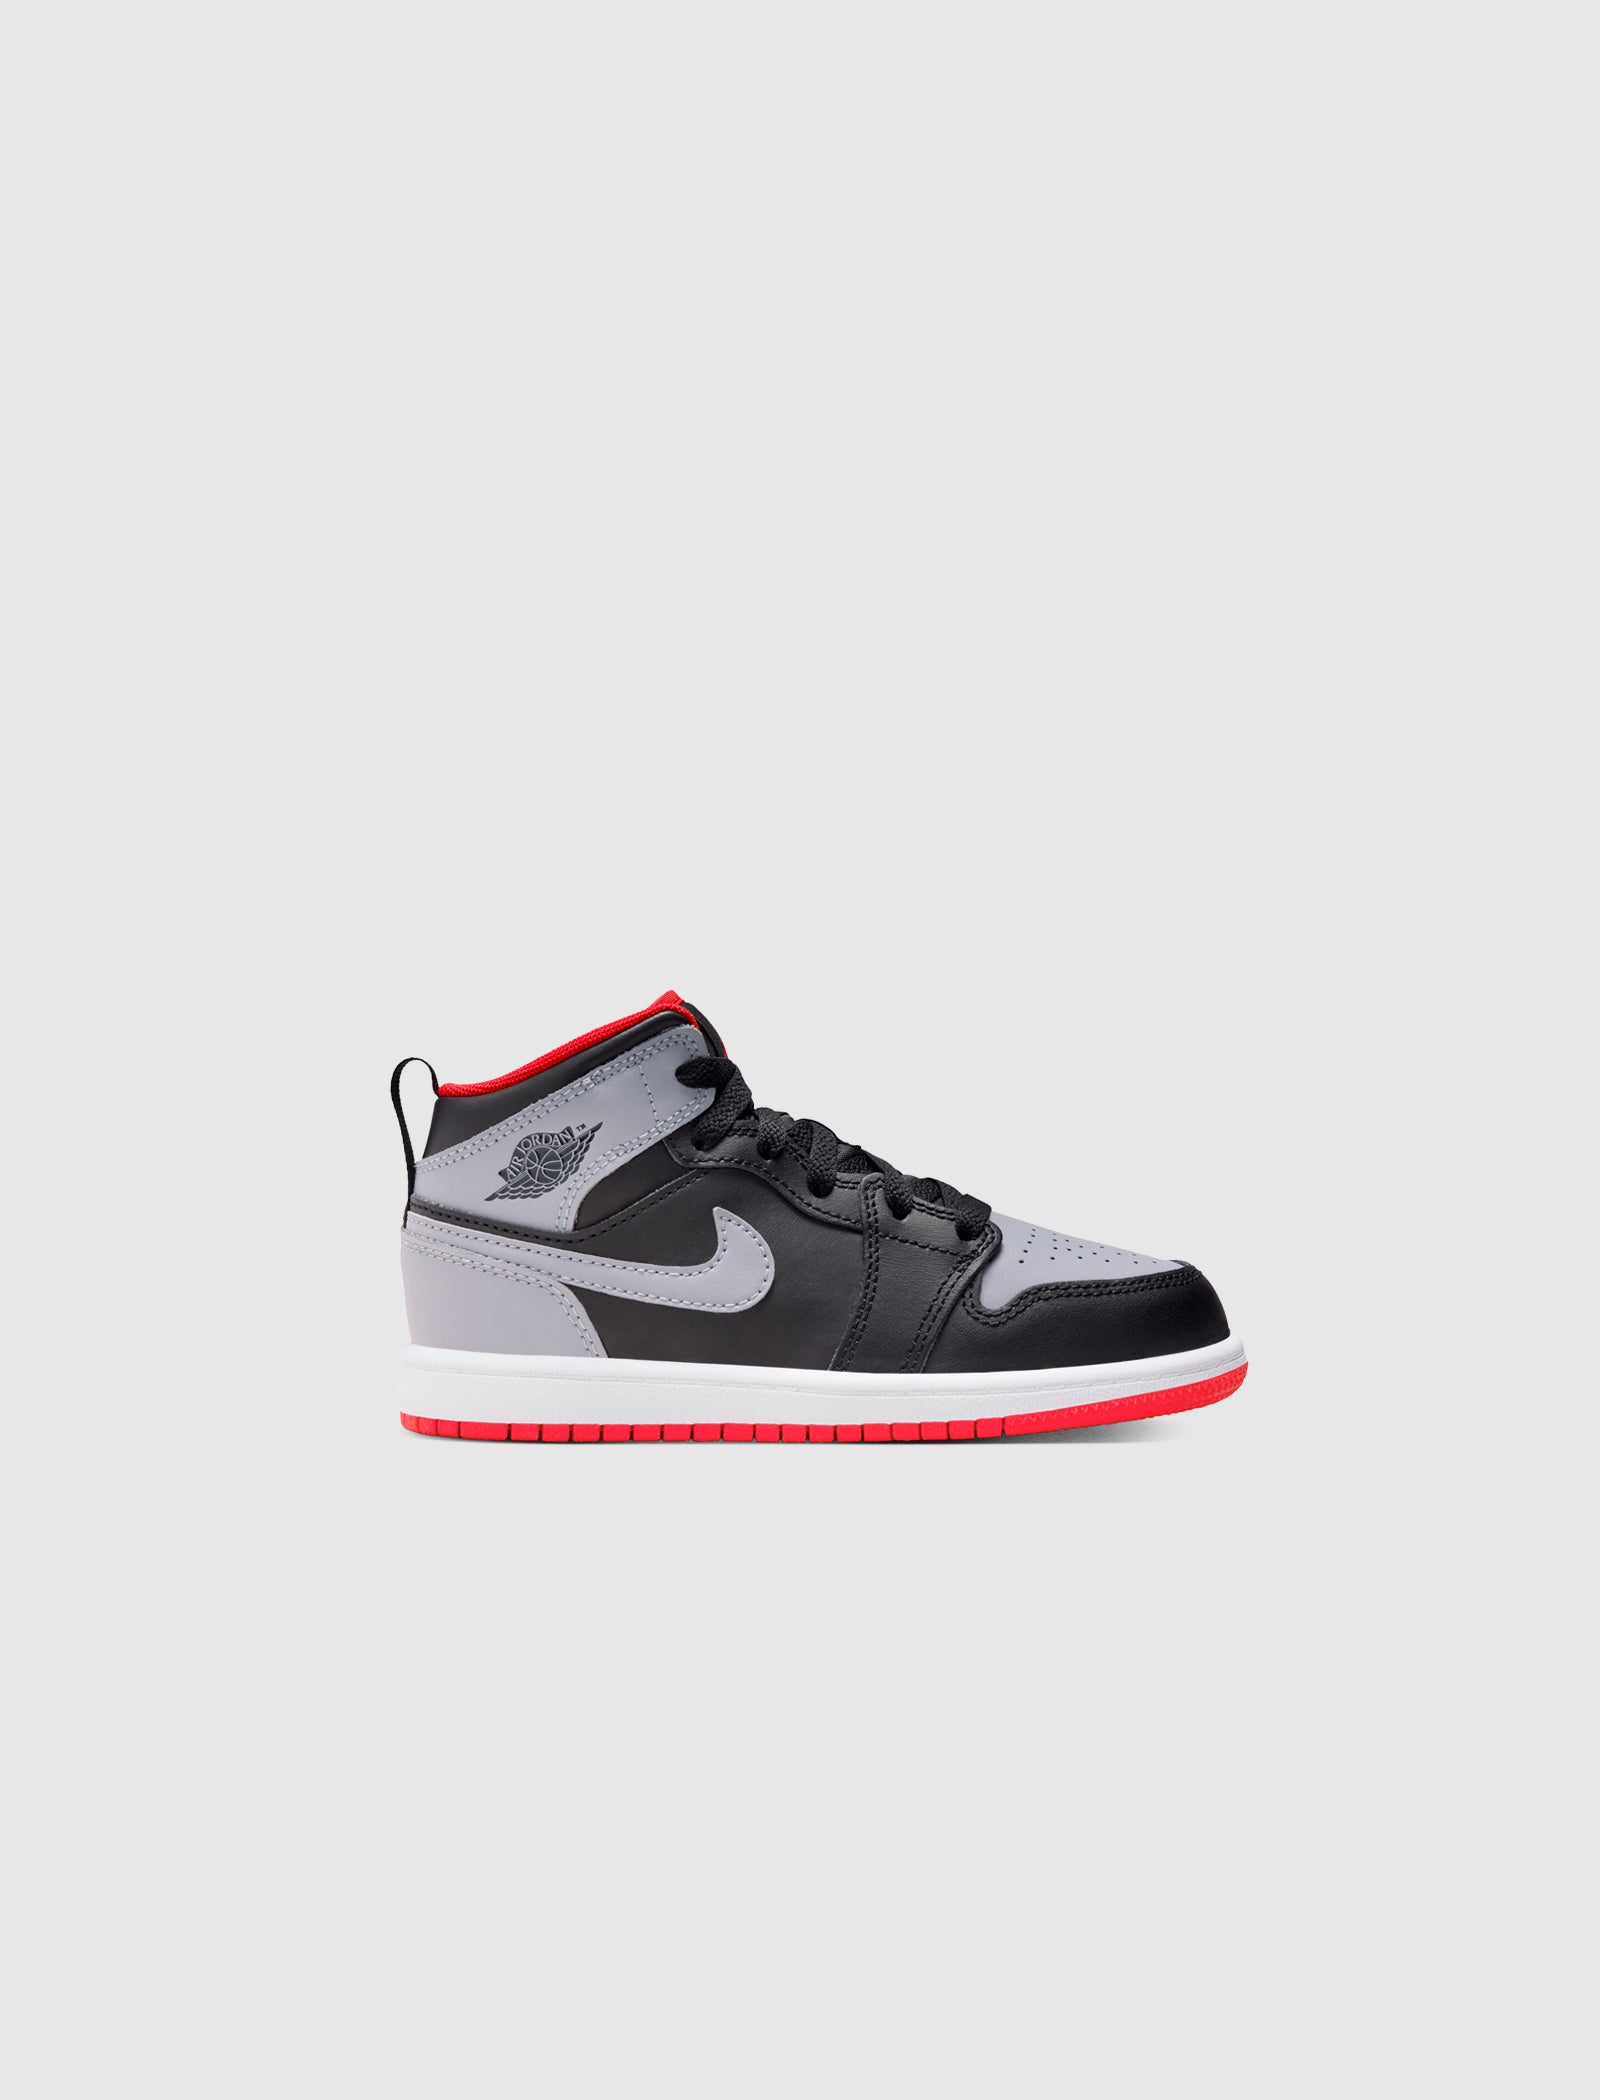 AIR JORDAN 1 MID "FIRE RED CEMENT" PS